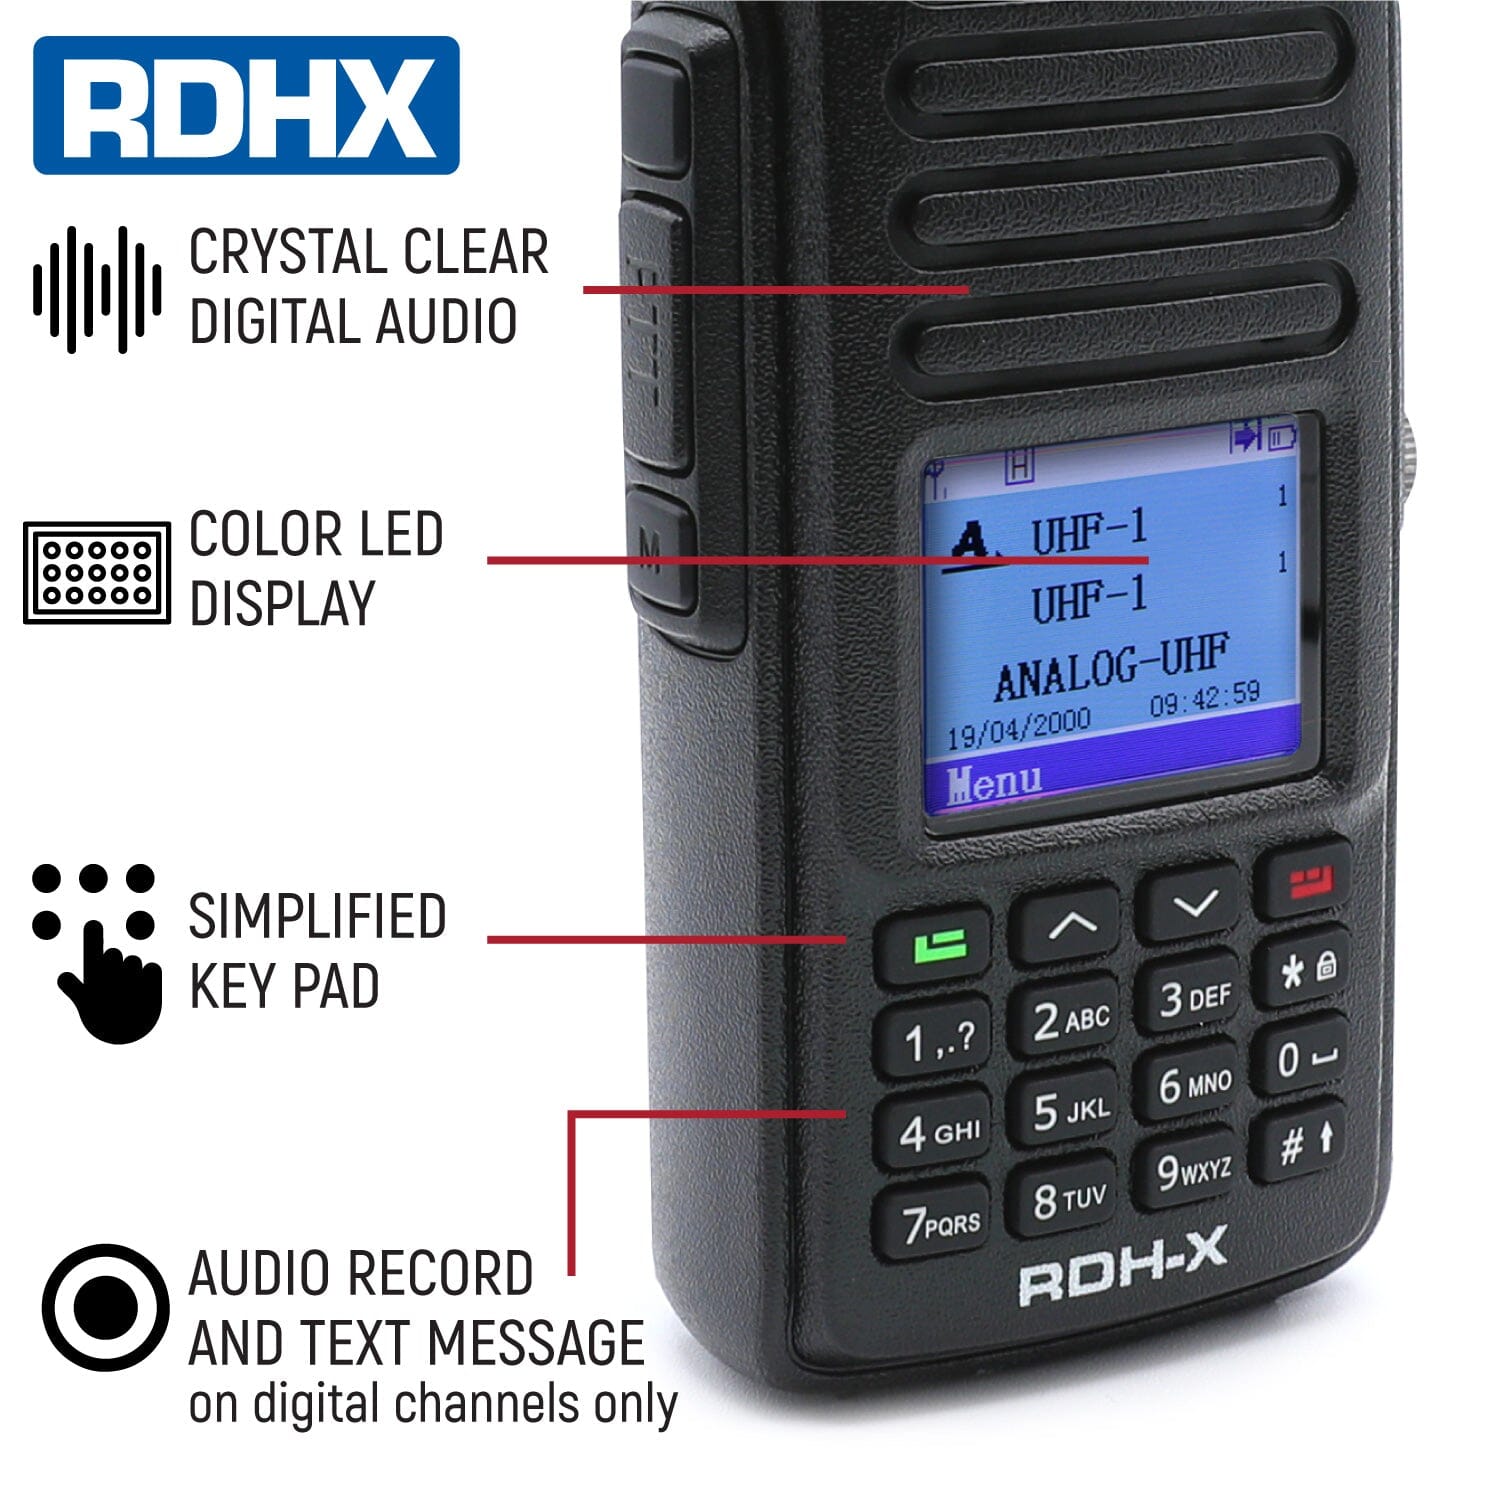 RDHX waterproof handheld with crystal clear audio, color LED display, easy to use keypad, audio record and text messaging